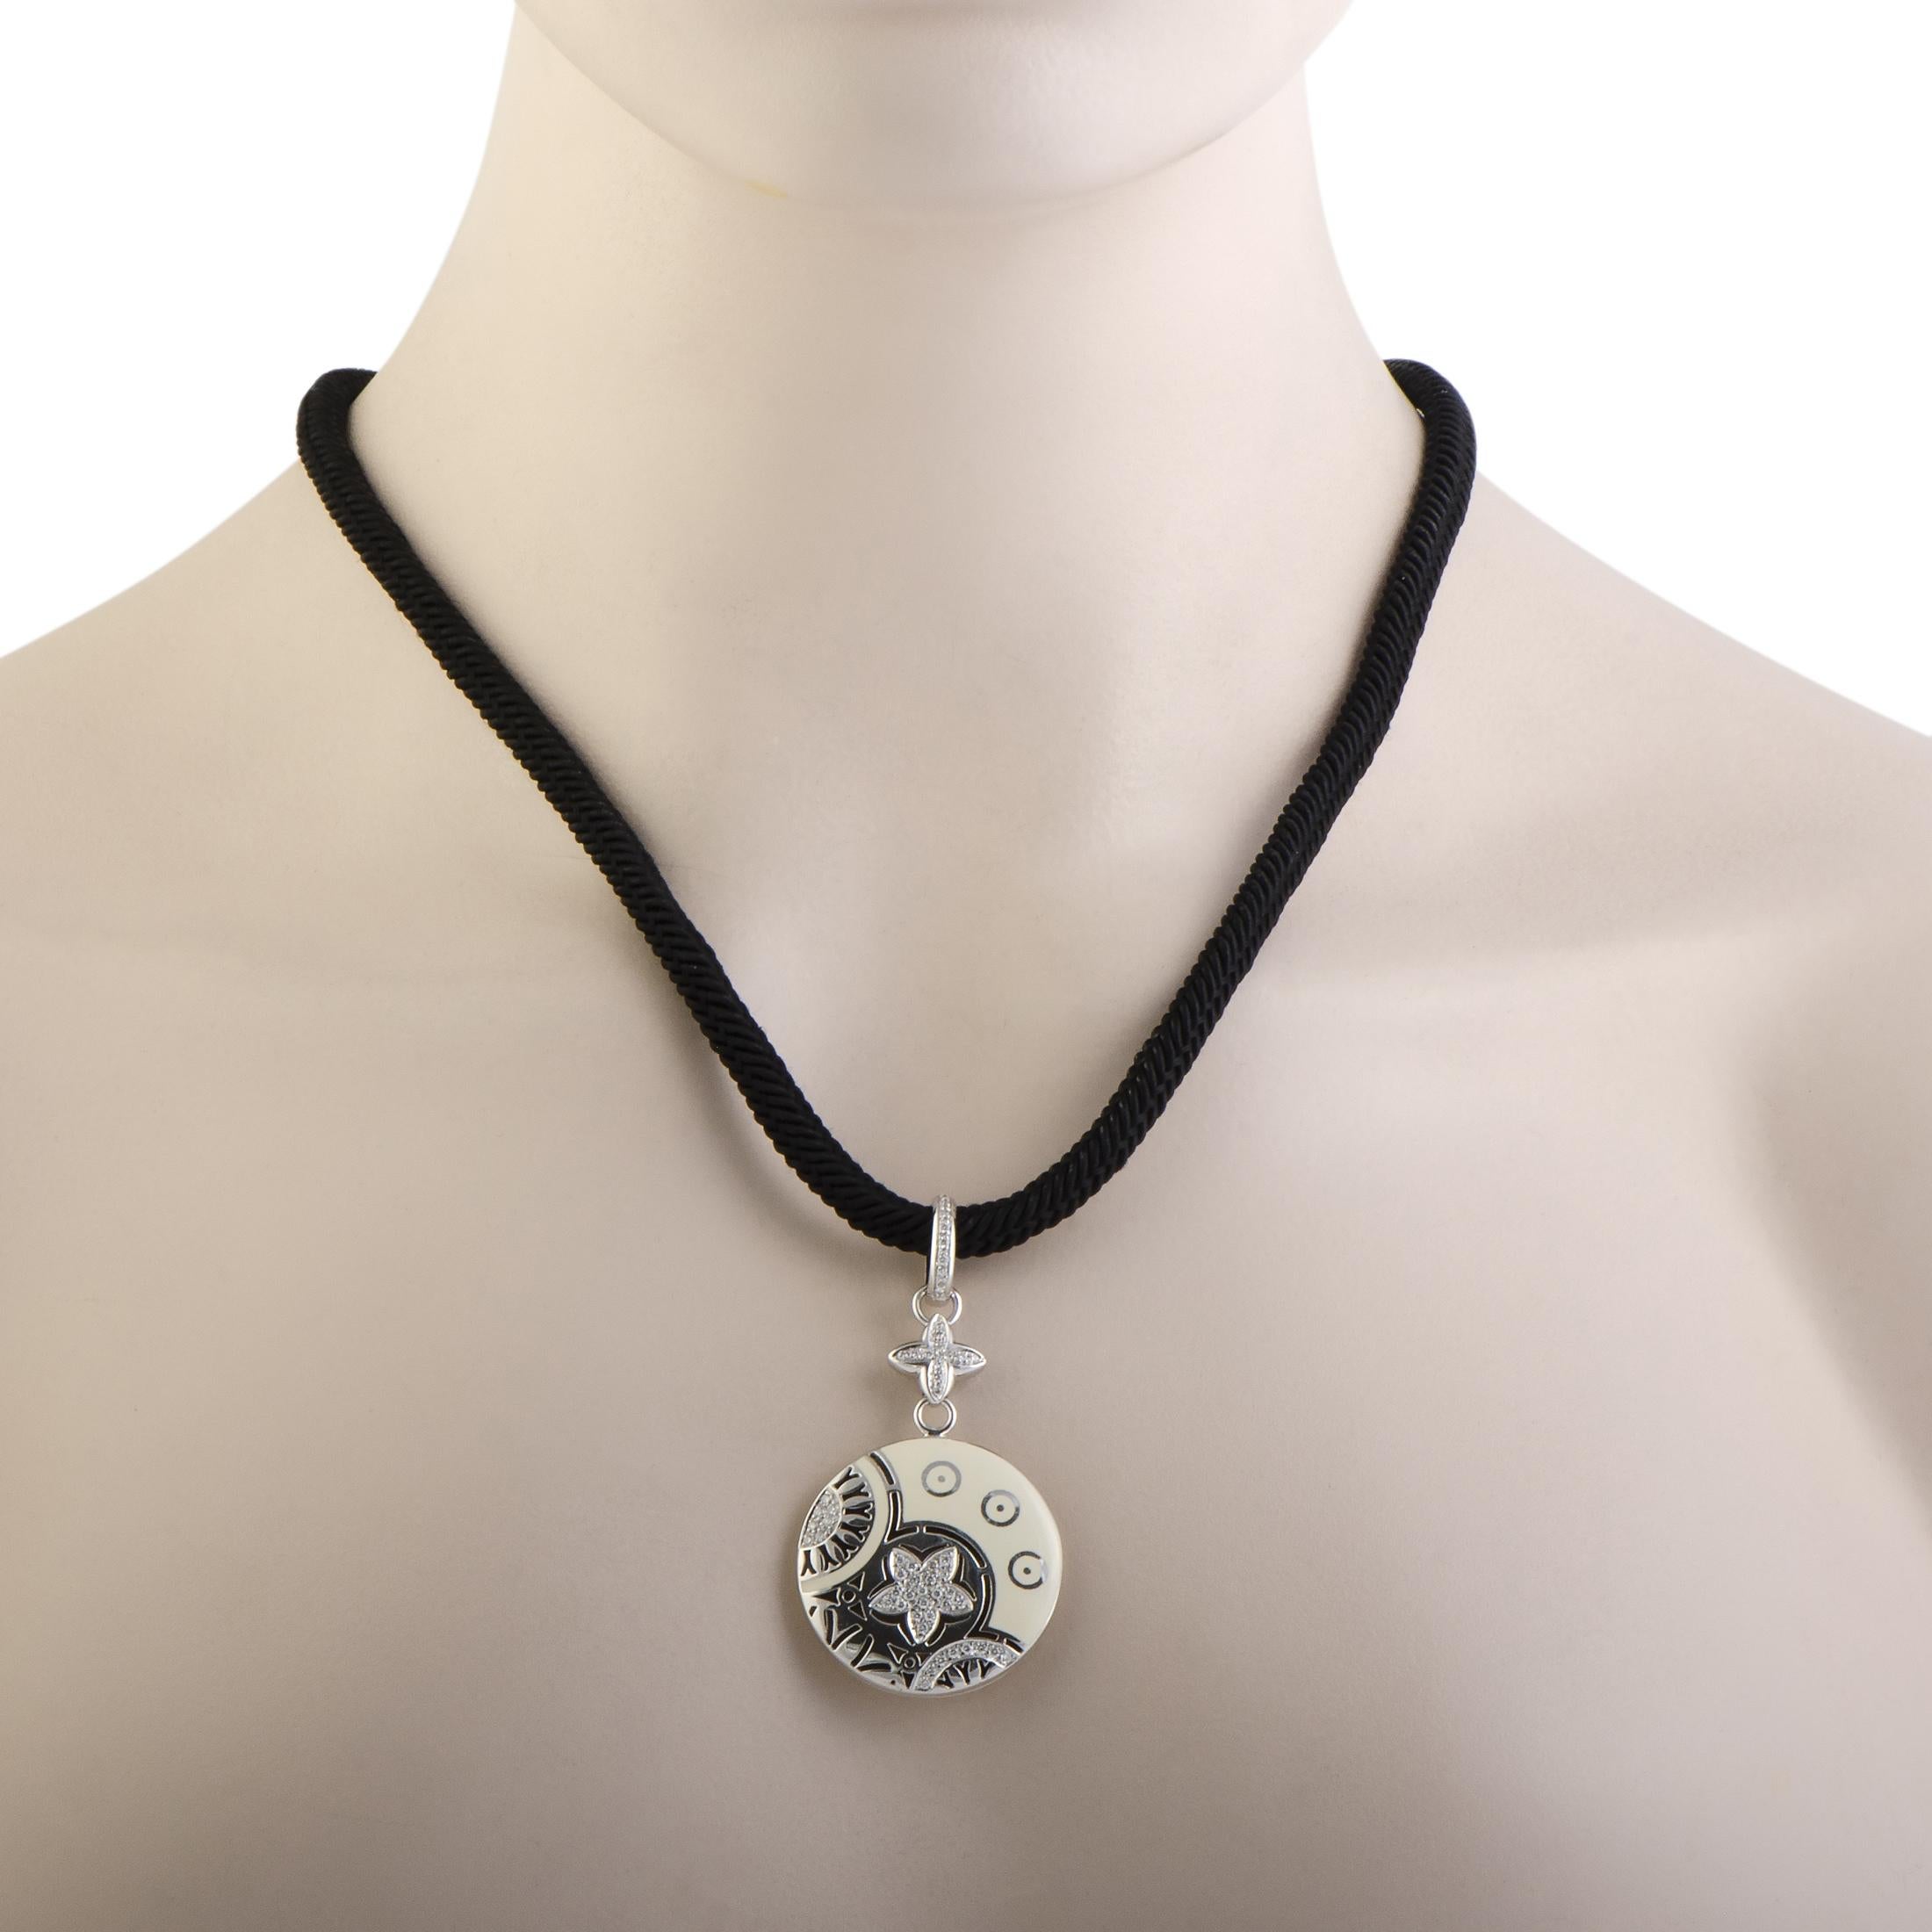 Presented with an eye-catching black cord onto which a splendidly decorated pendant is attached, this gorgeous necklace offers an exceptionally stylish appearance. The necklace is beautifully designed by Nouvelle Bague and it is crafted from 18K